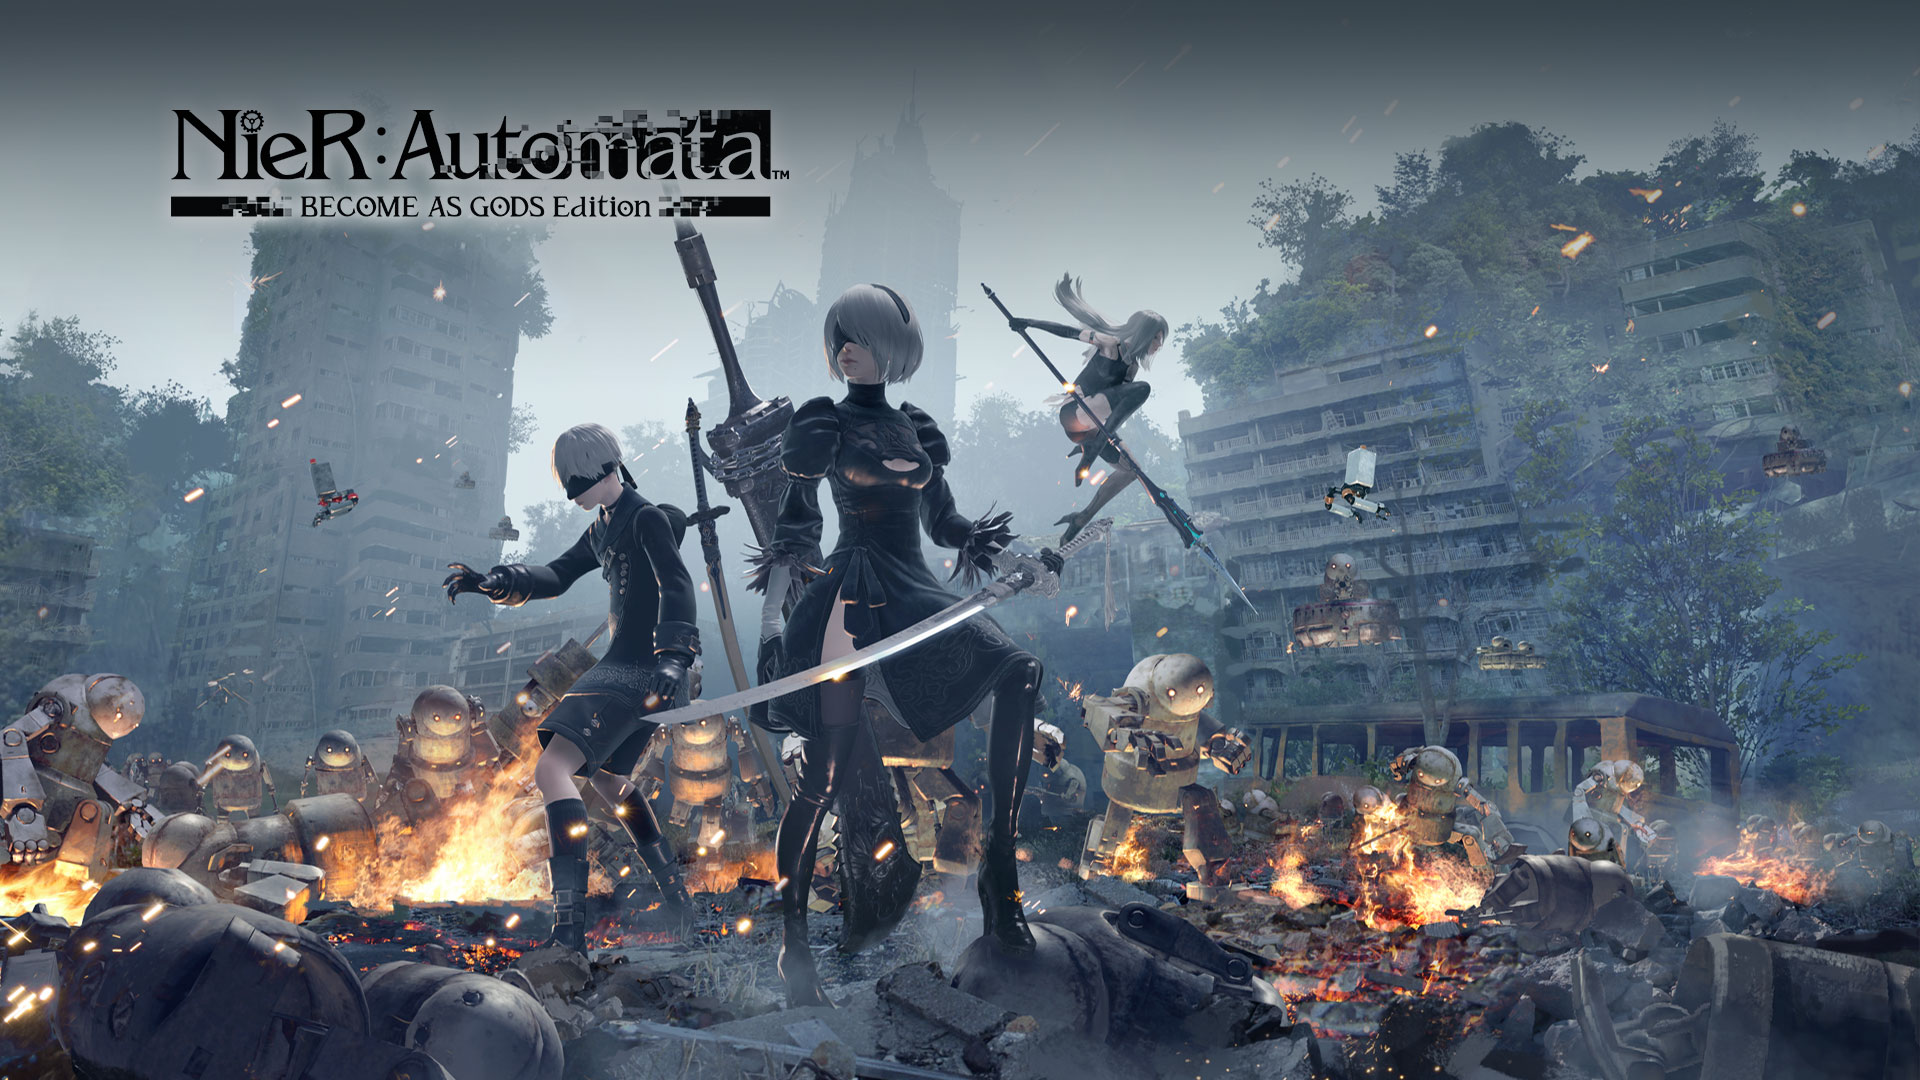 Nier Automata Become as Gods Edition, androids 2B, 9S and A2 battle machine invaders from another world